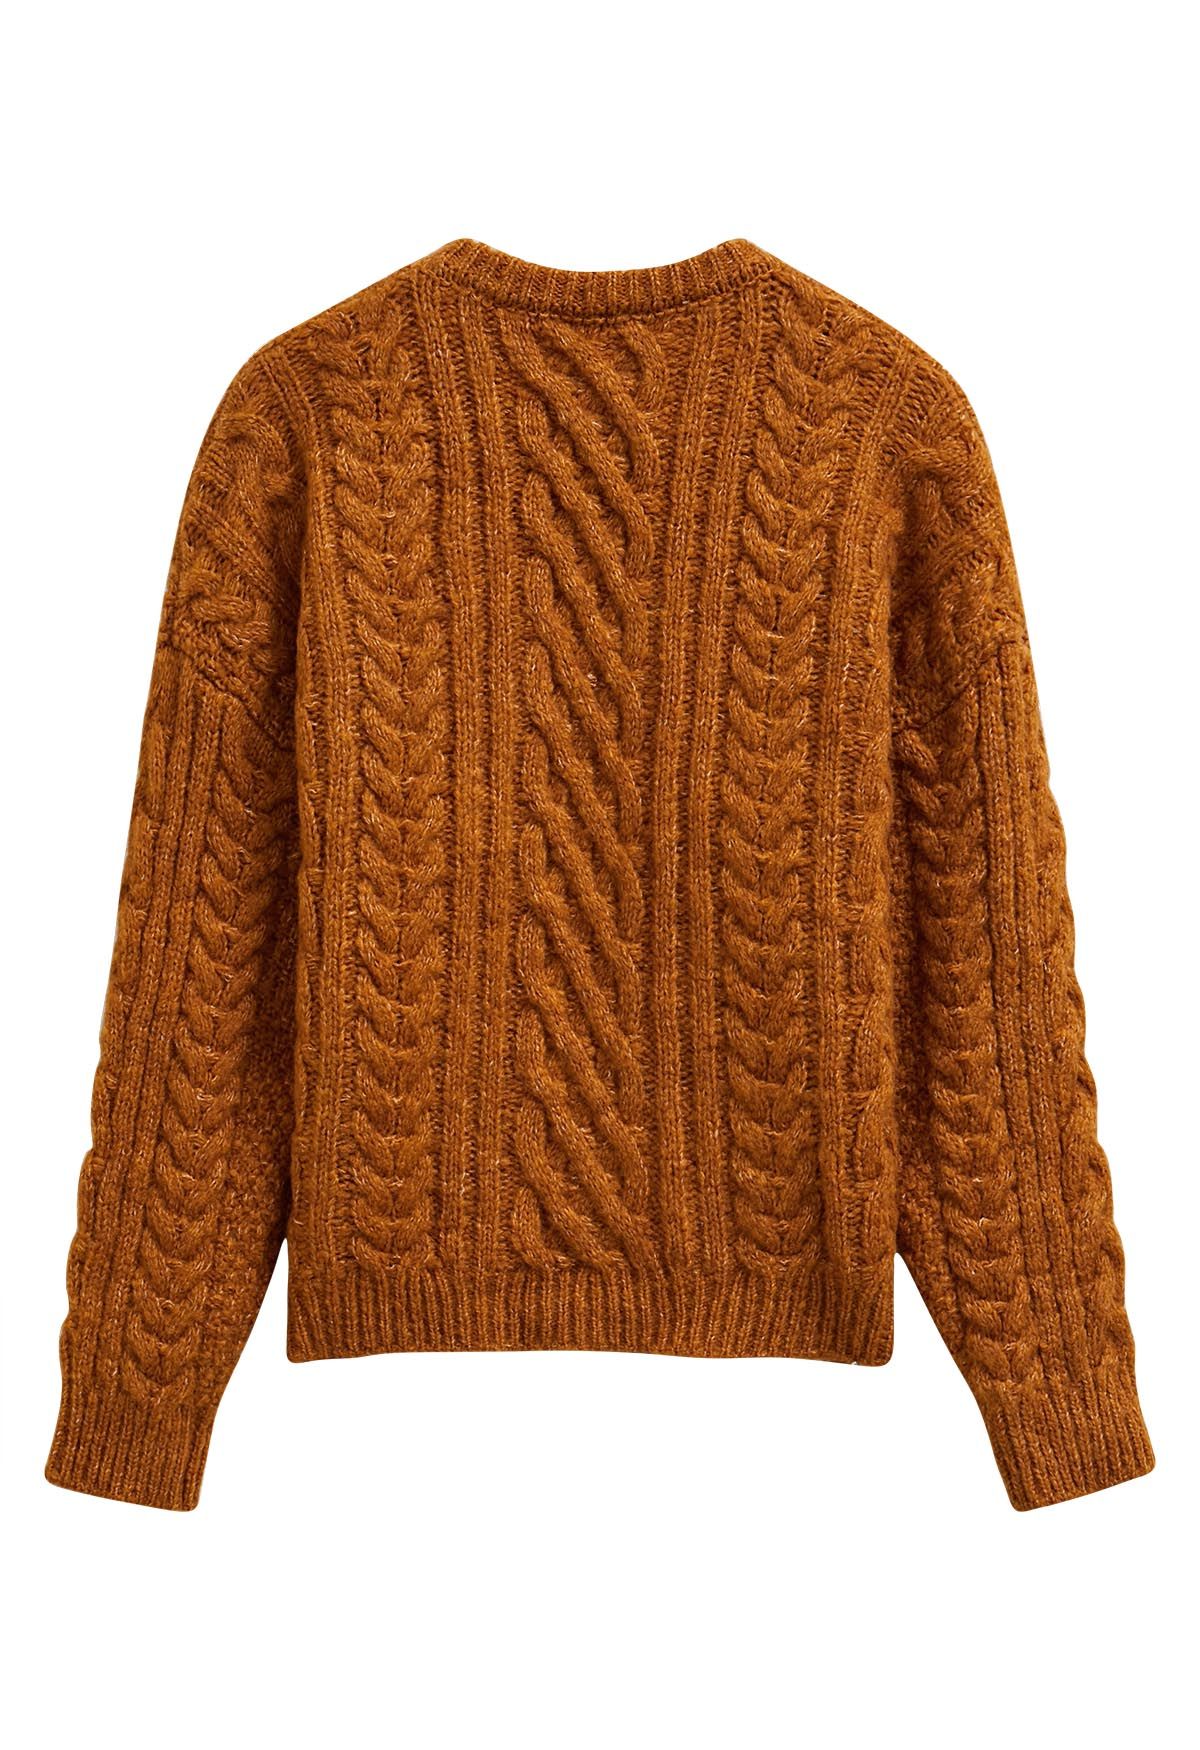 Back To Cozy Cable Knit Sweater in Pumpkin